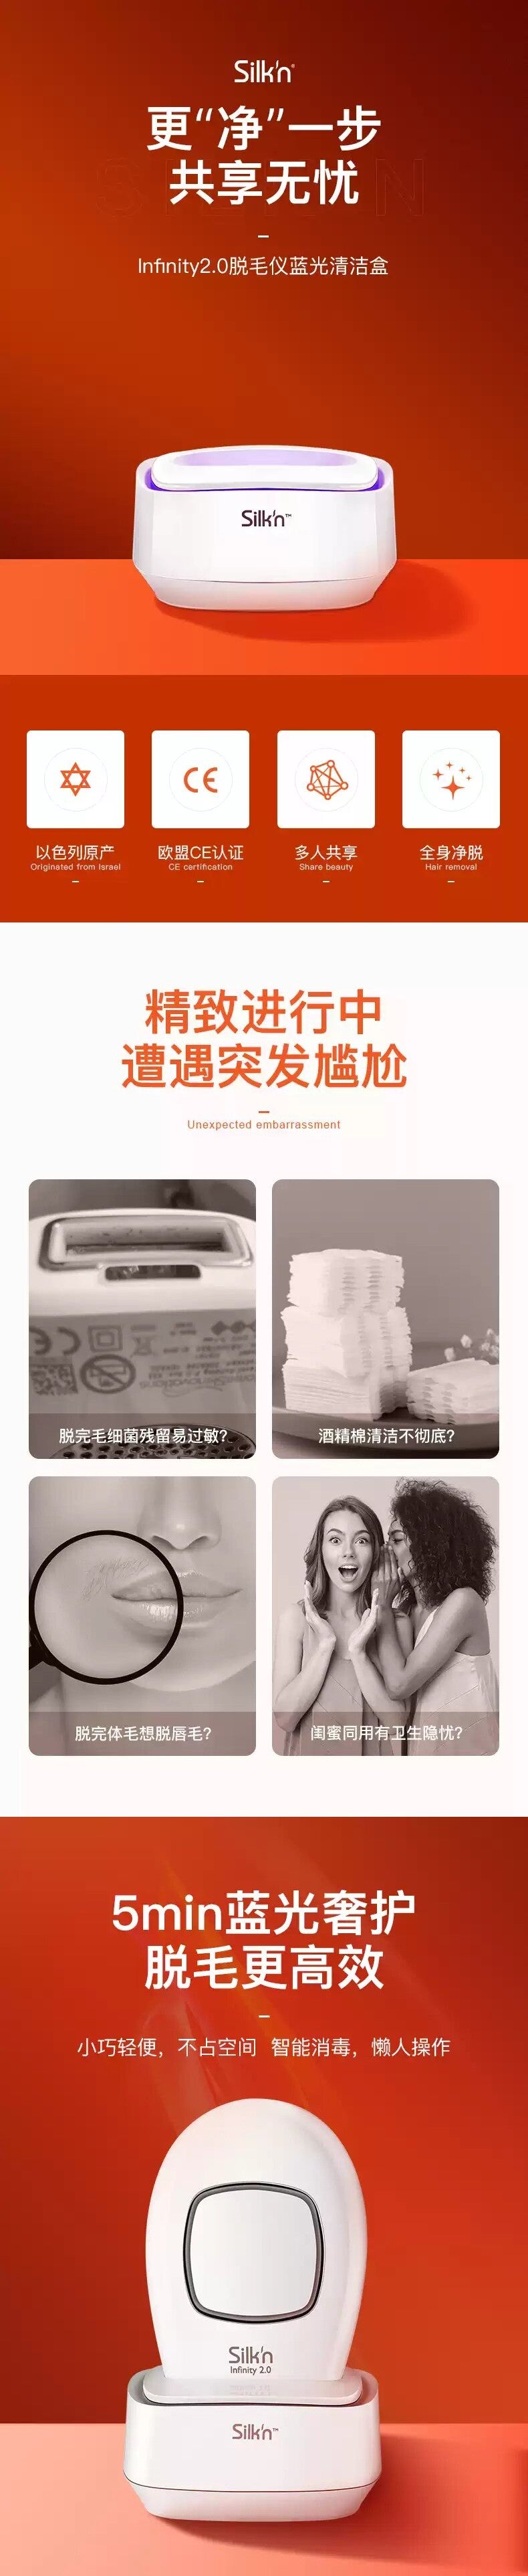 Silk'n Infinity 2.0 With Cleansing Box Home IPL Hair Removal Device for Permanent Hair Removal - Silk'n Cleansing Box and 永久除毛器 - BeautyFoo Mall Malaysia